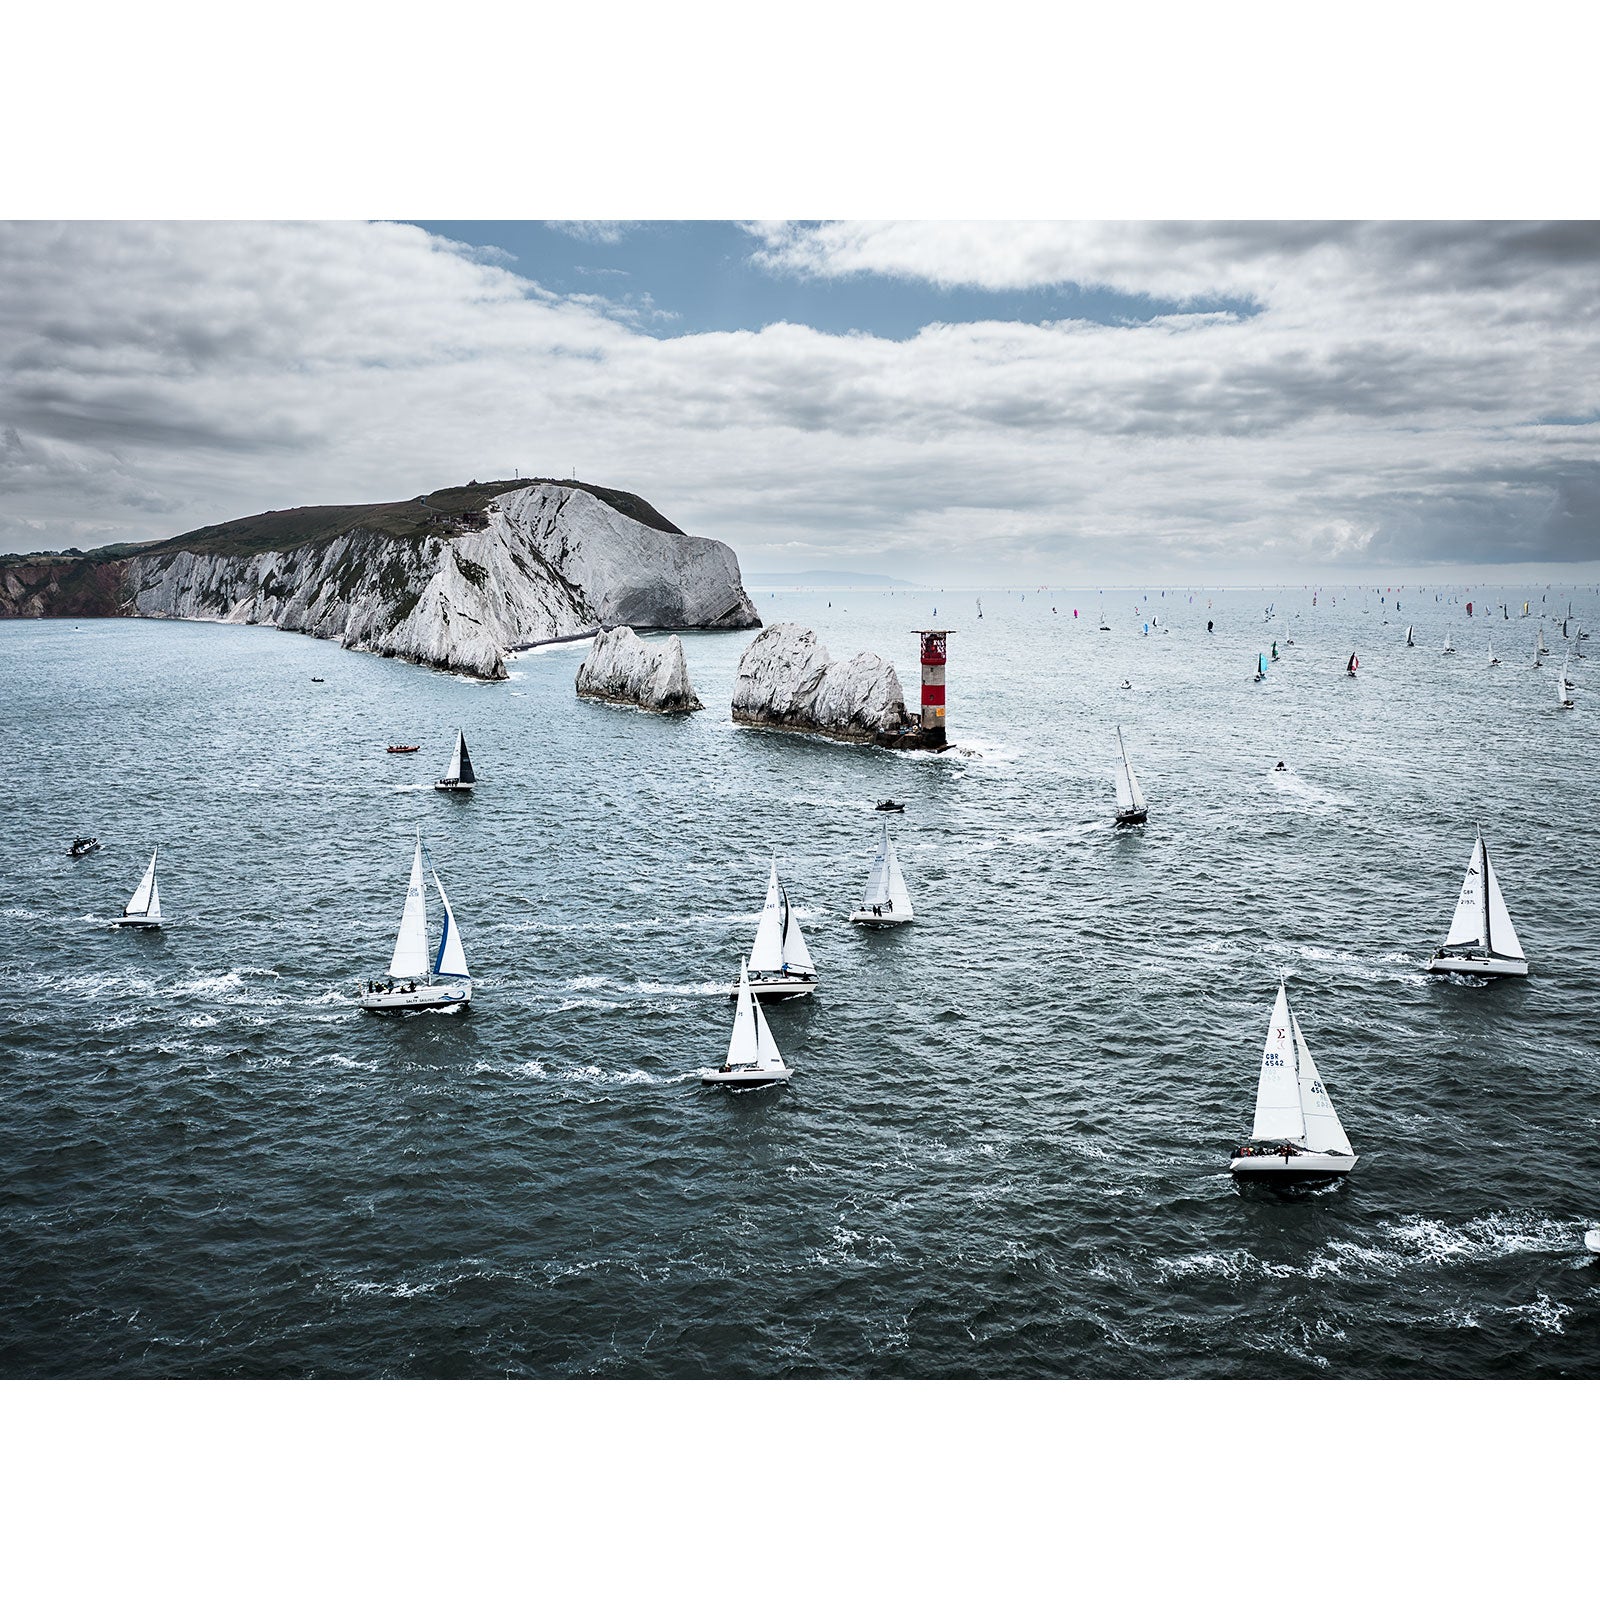 Sailboats racing near a coastal headland with a red lighthouse beacon on the Isle of Wight in the Round the Island Race 2023 captured by Available Light Photography.